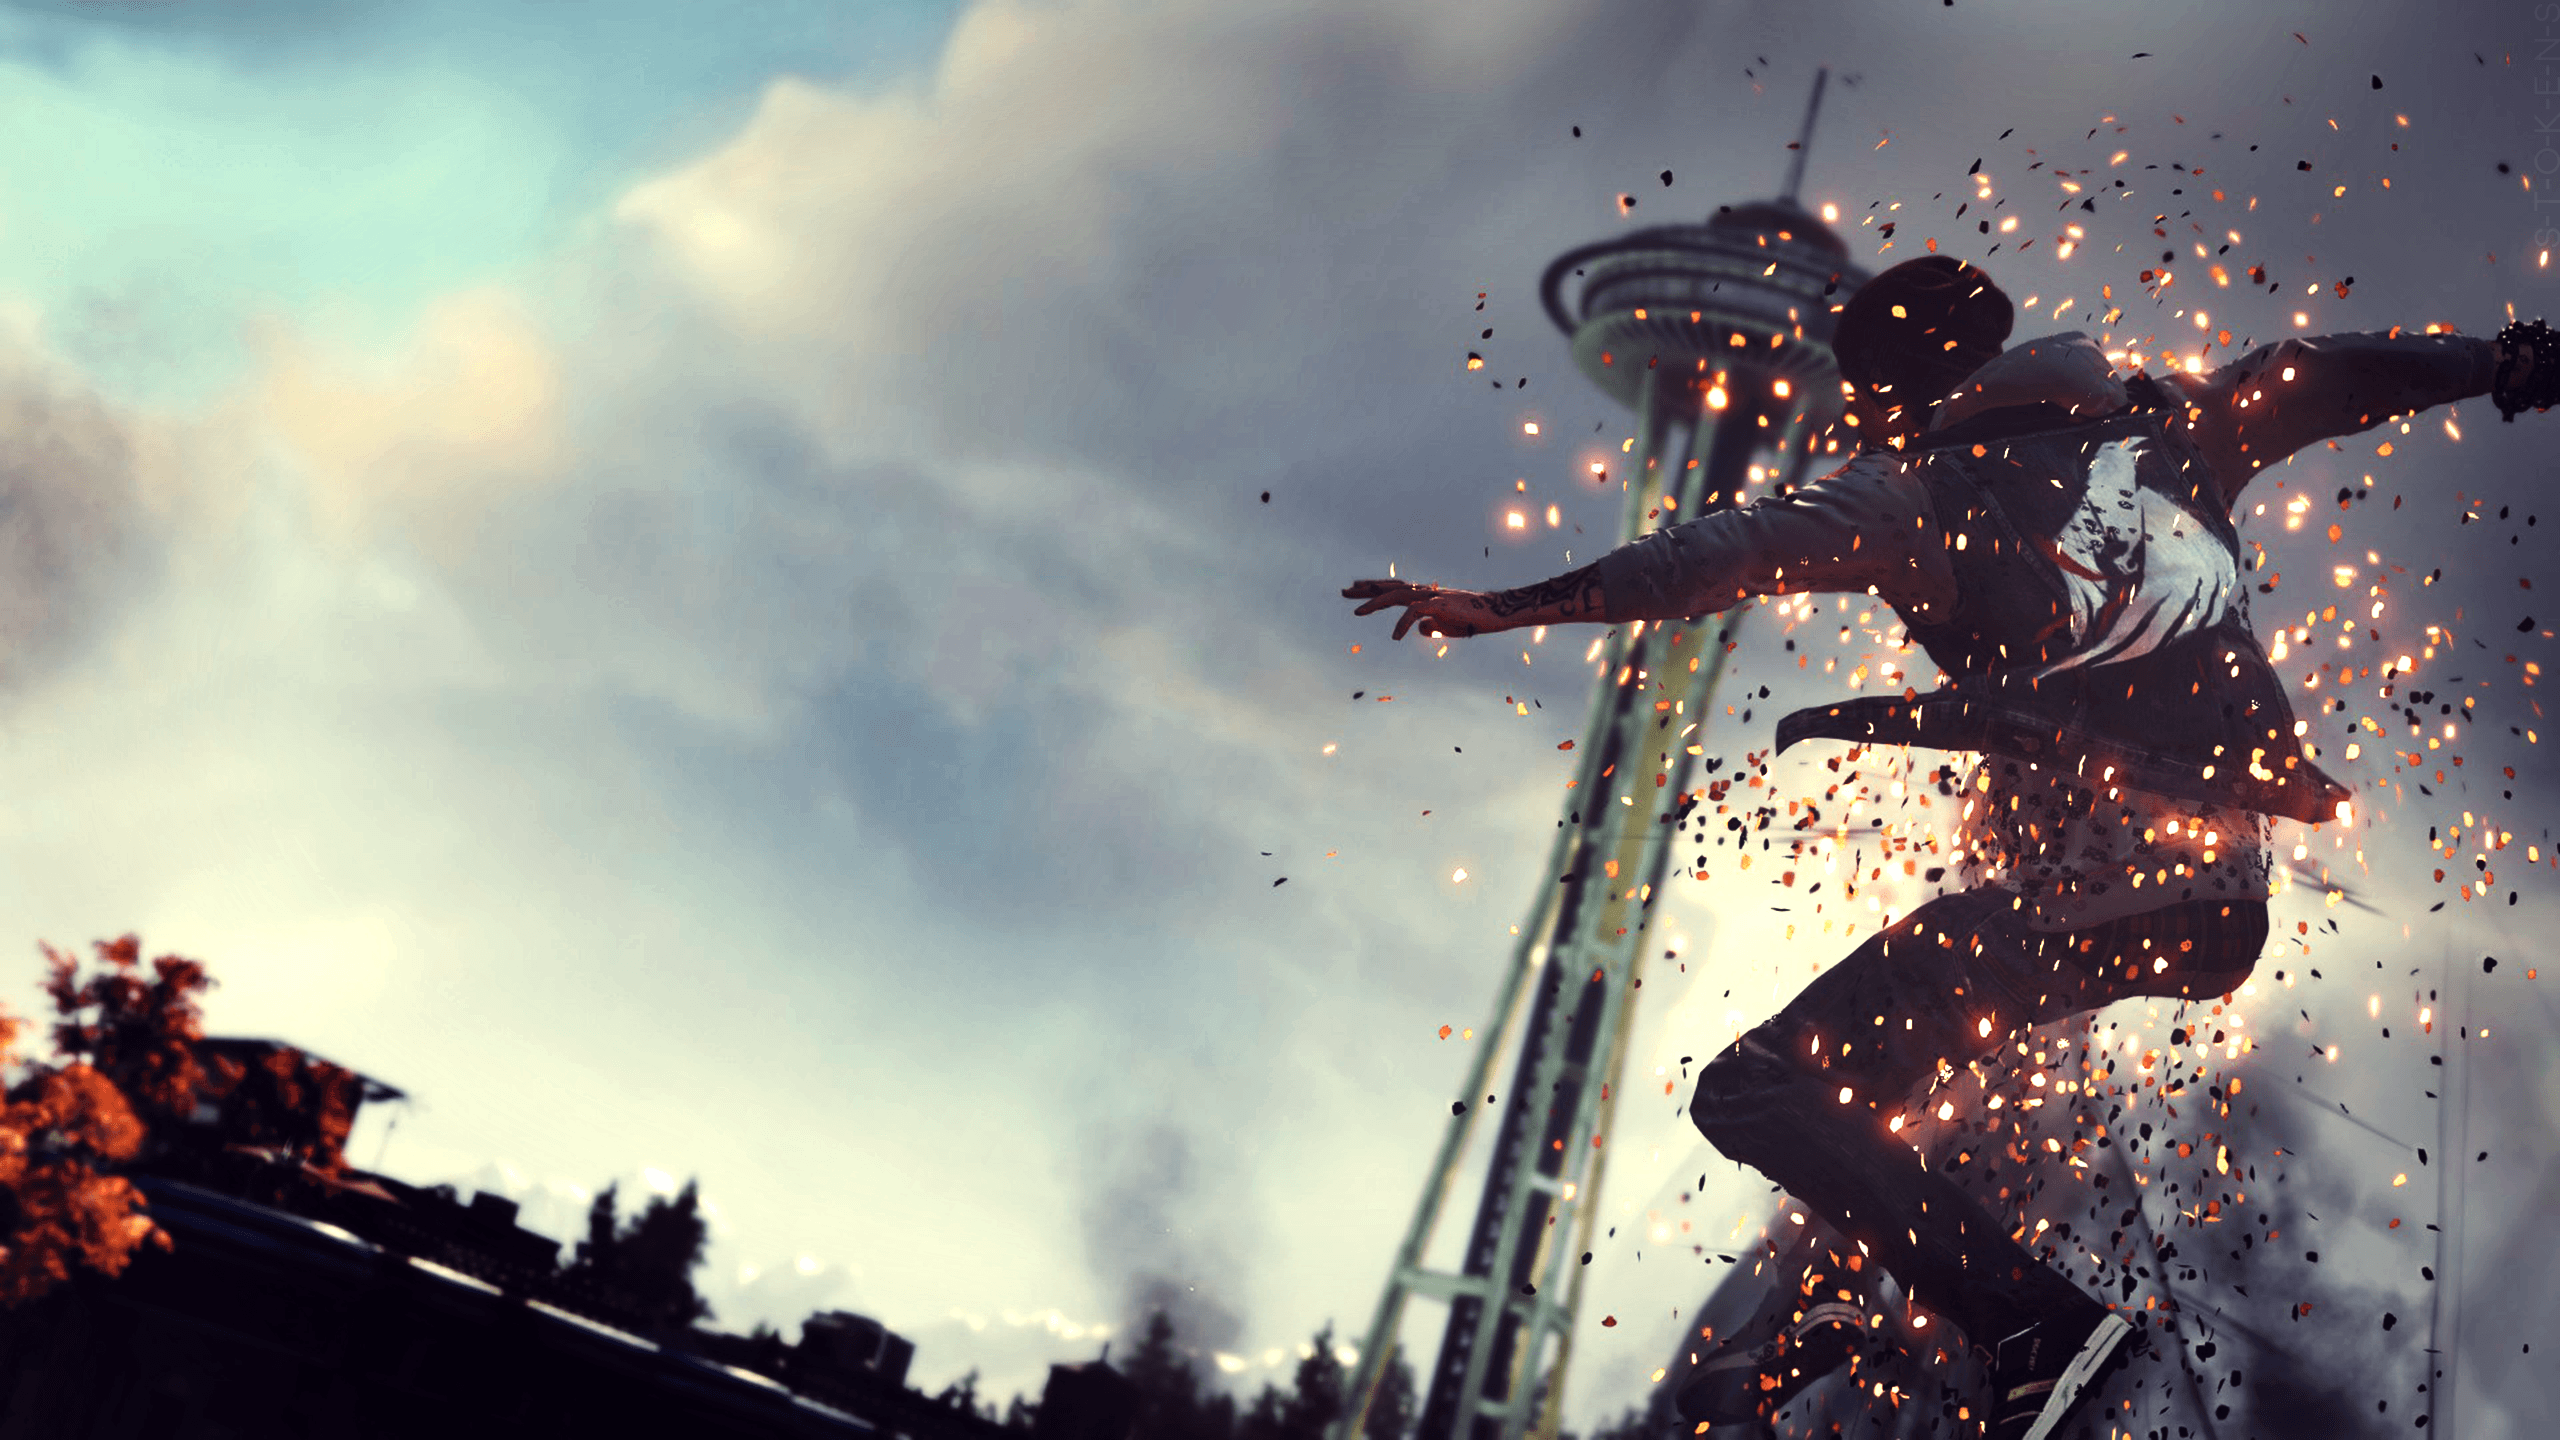 Infamous second son wallpaper Gallery